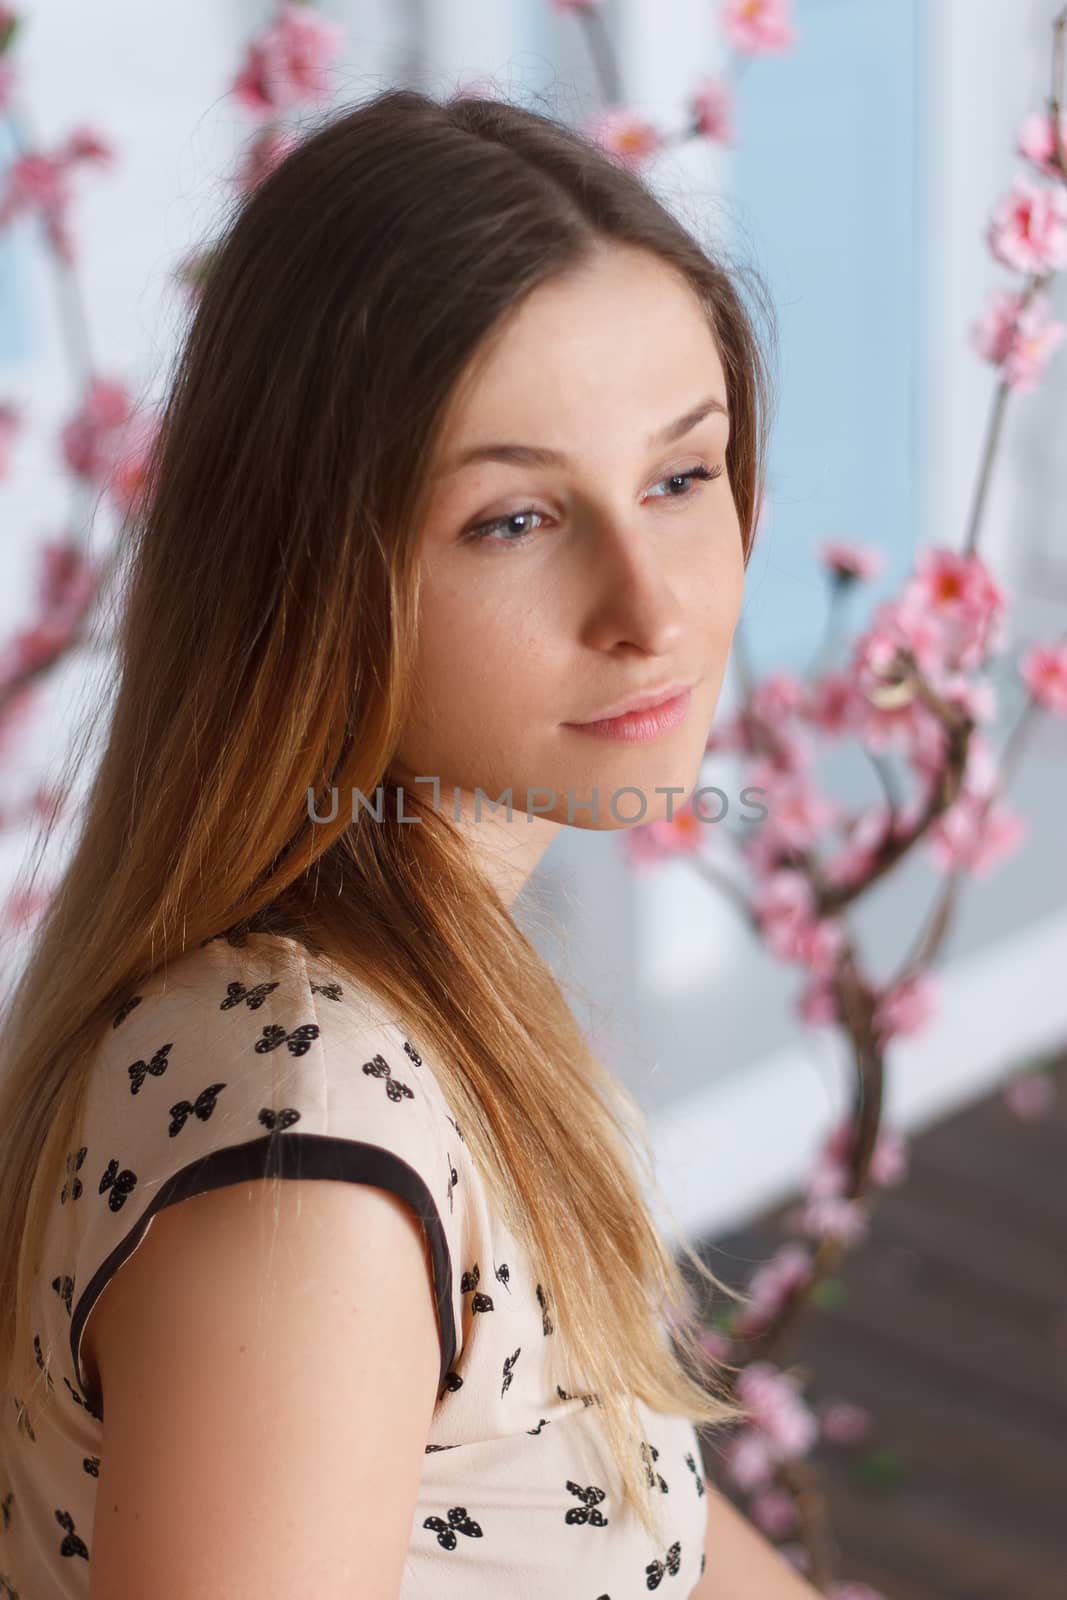 Beautiful girl with long hair in flowering garden by victosha